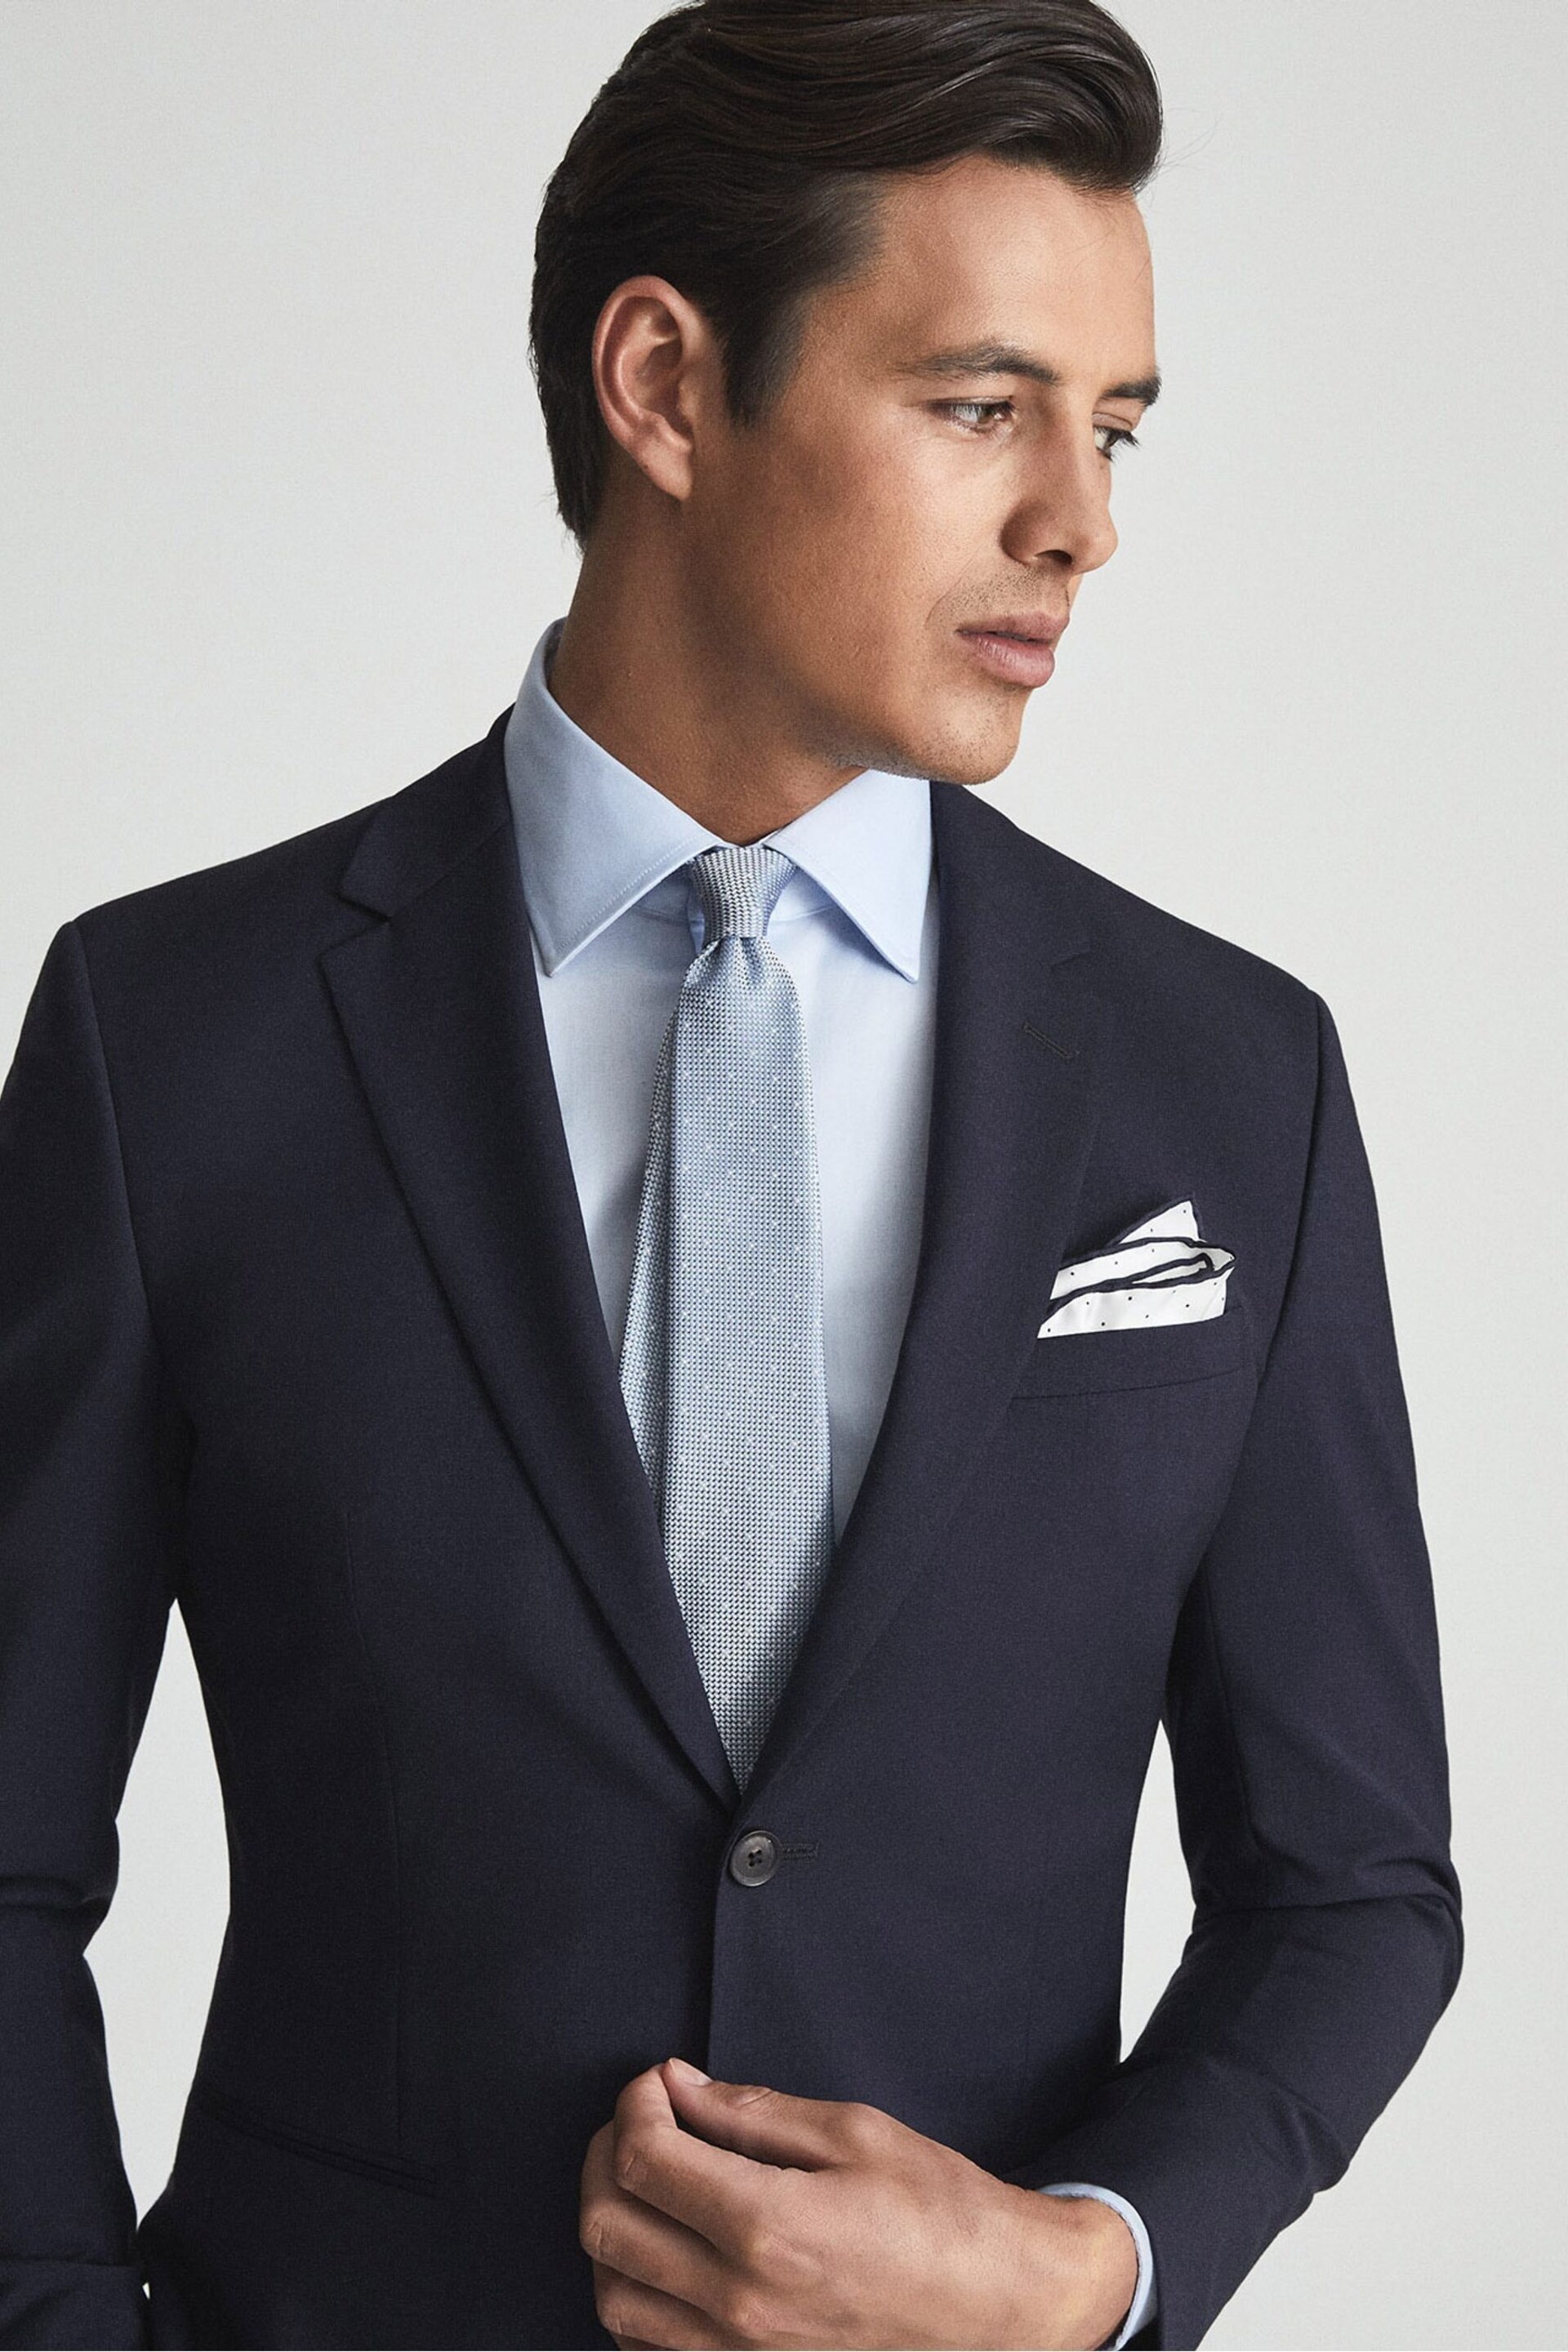 Reiss Airforce Blue Liam Polka Dot Tie - Image 2 of 4